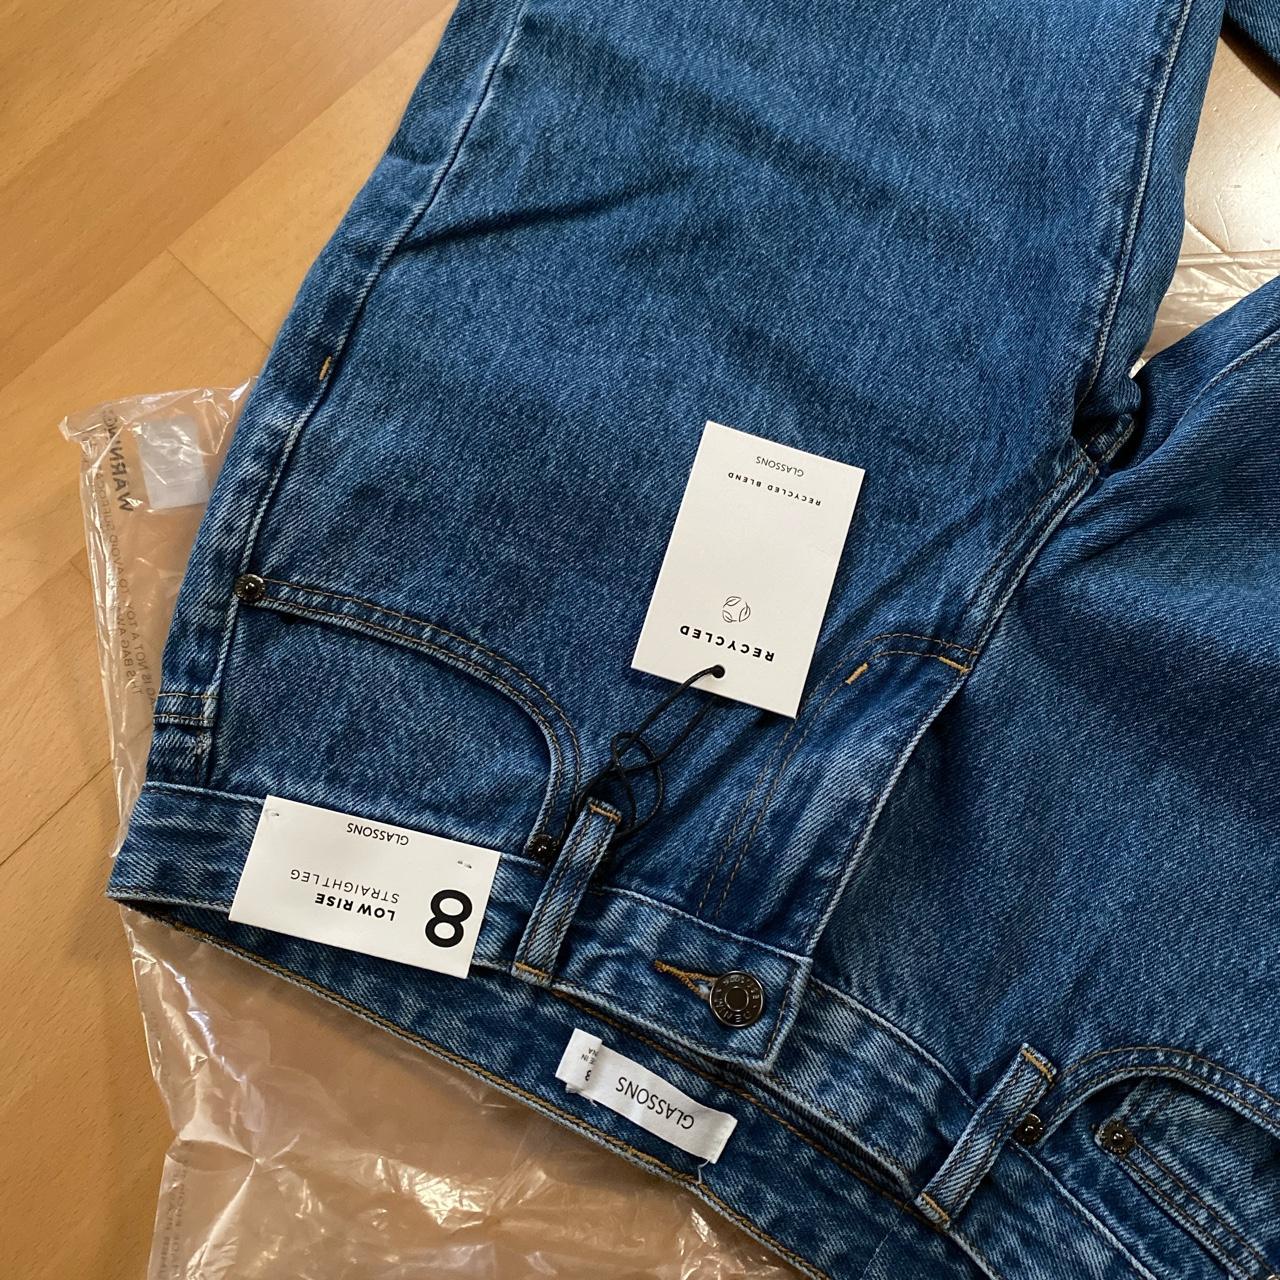 Glassons Women's Blue and Navy Jeans | Depop